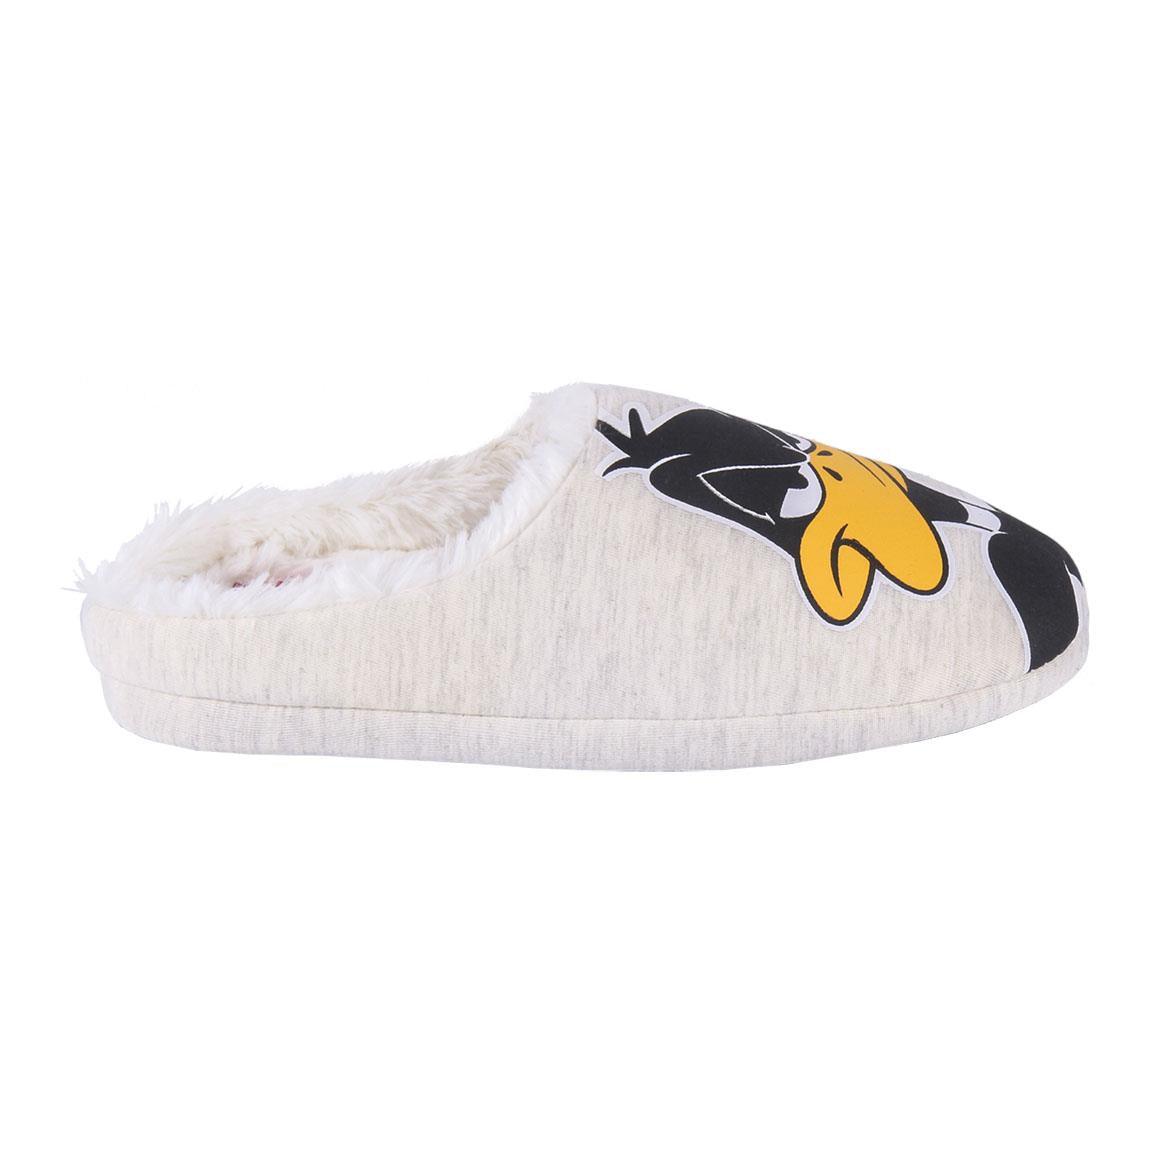 Pantofole Adulto - LOONEY TUNES DUFFY DUCK - Magic Dreams Store